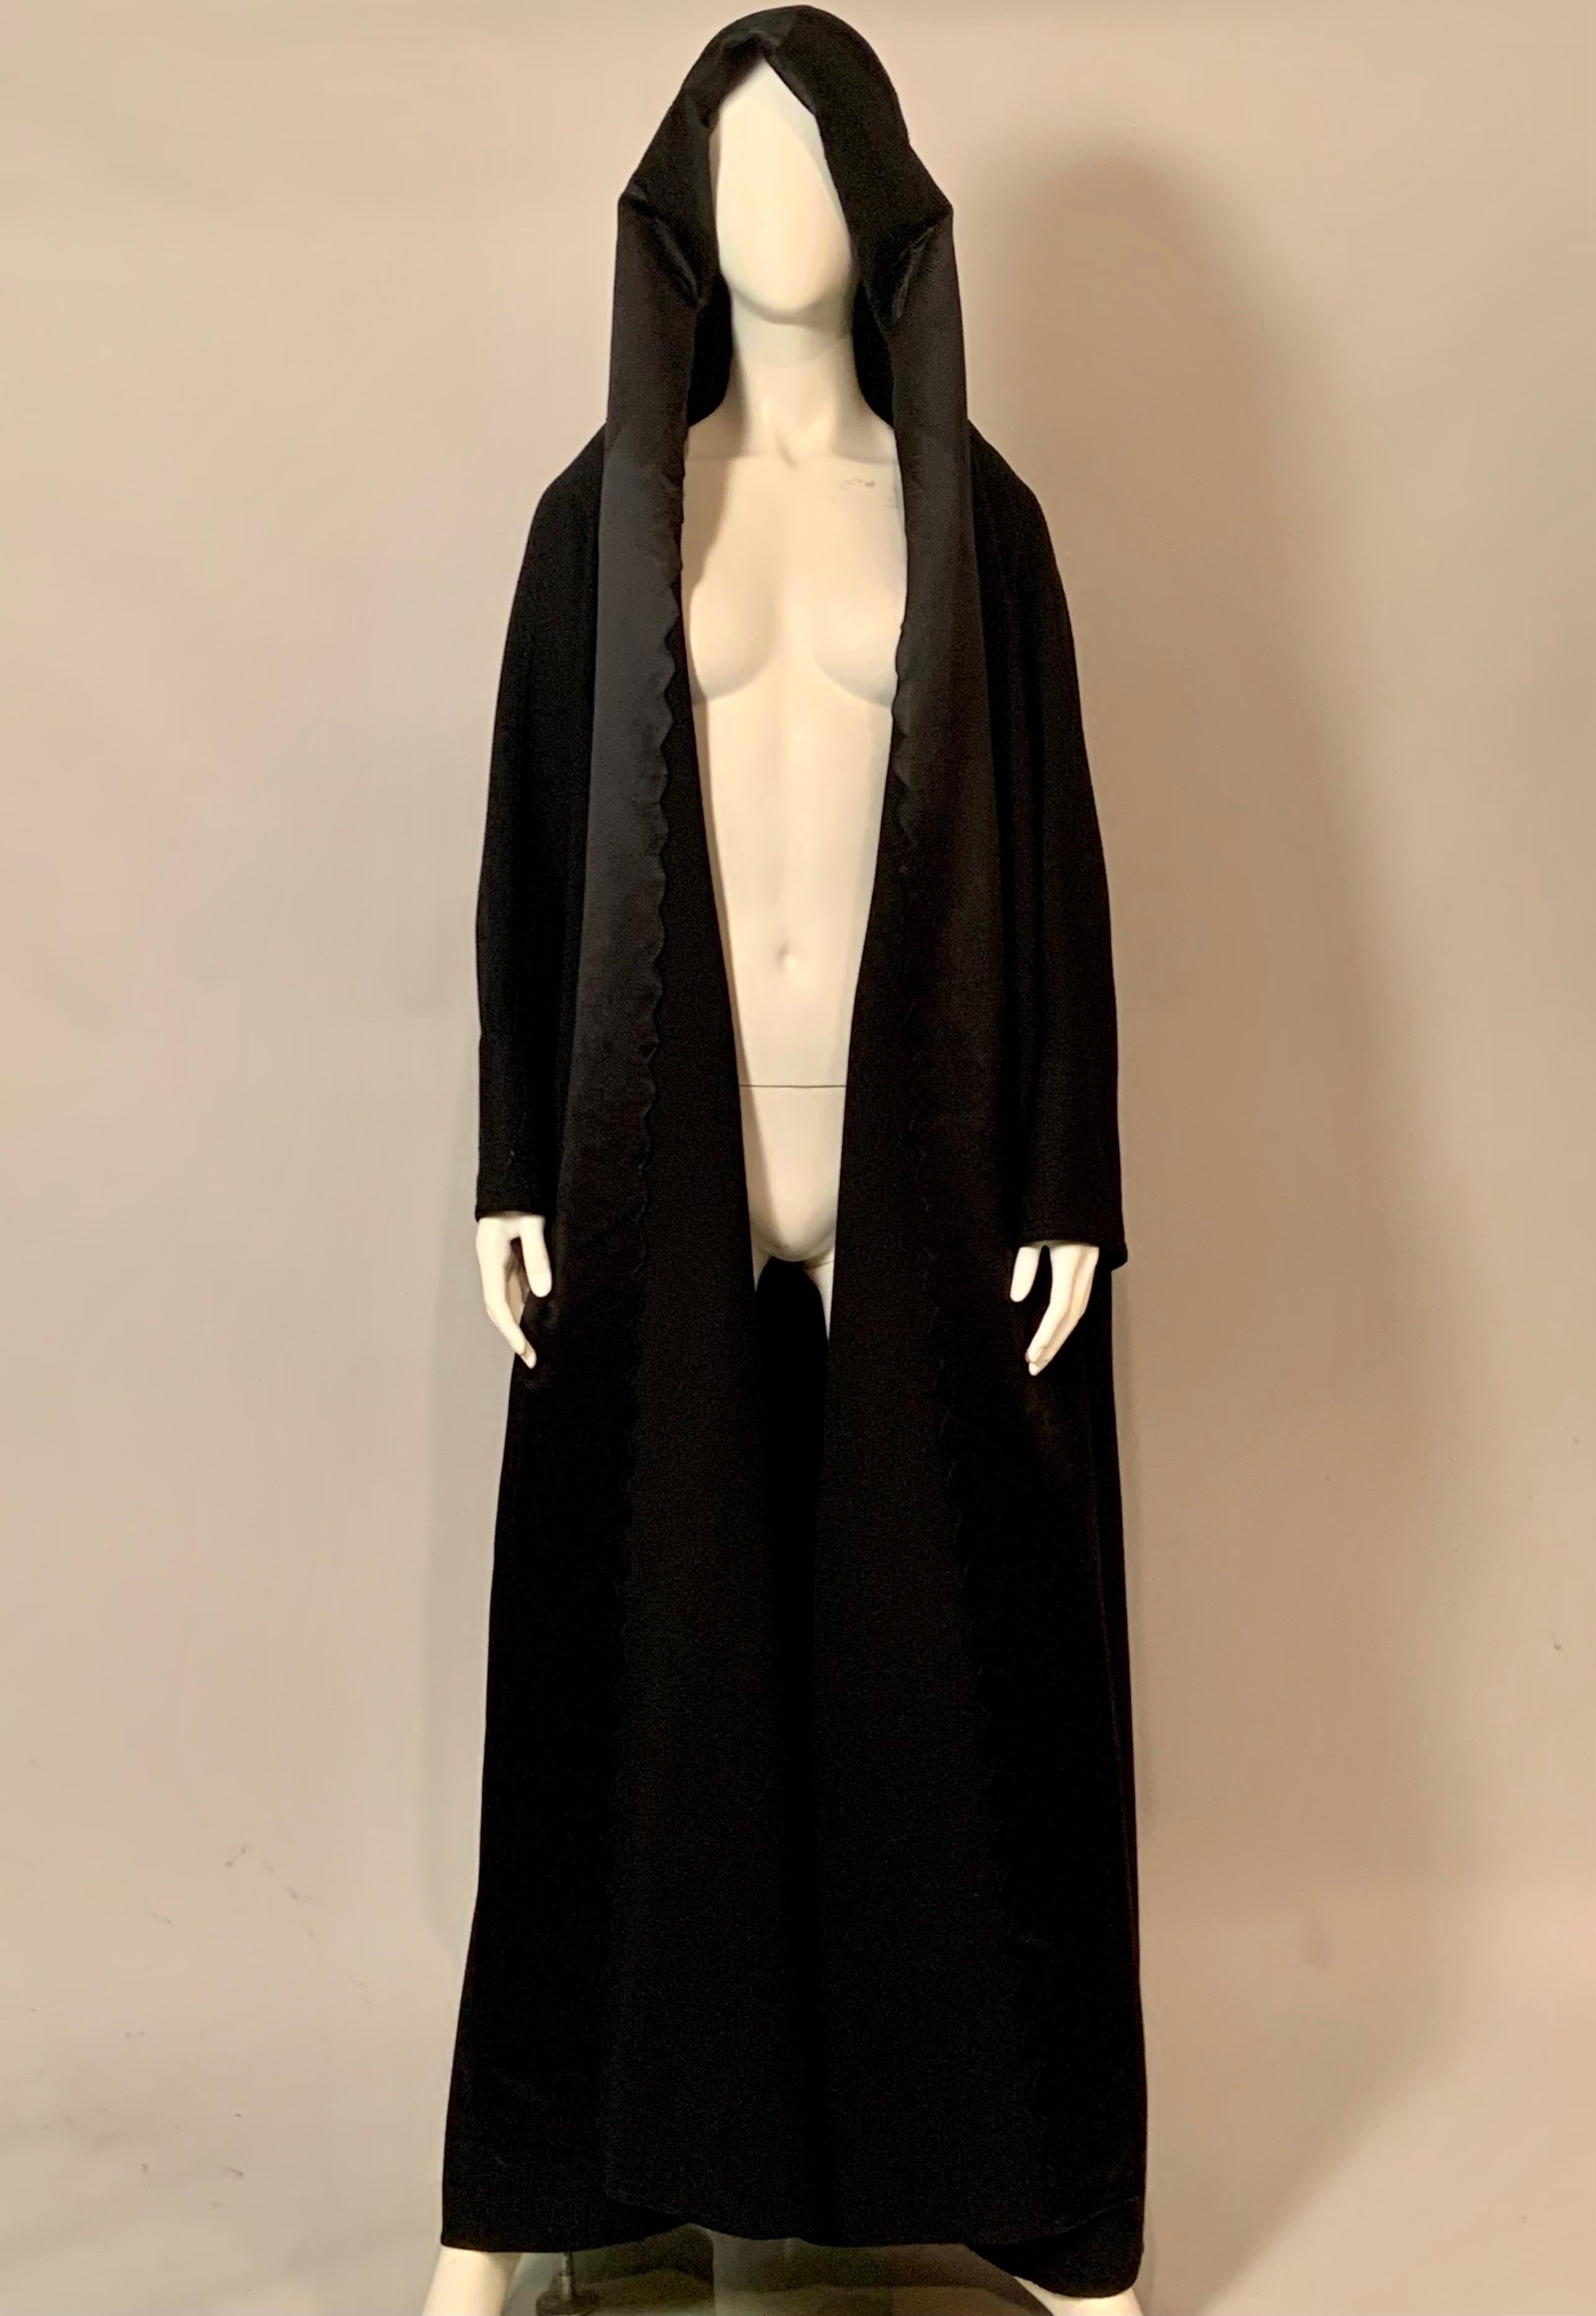 Geoffrey Beene designed a stunning hooded evening coat in his usual spare and elegant style.  This black wool and satin coat has beautiful trapunto stitching on the 
collar, hood and the cuffs and it is scalloped on the interior edge to frame your